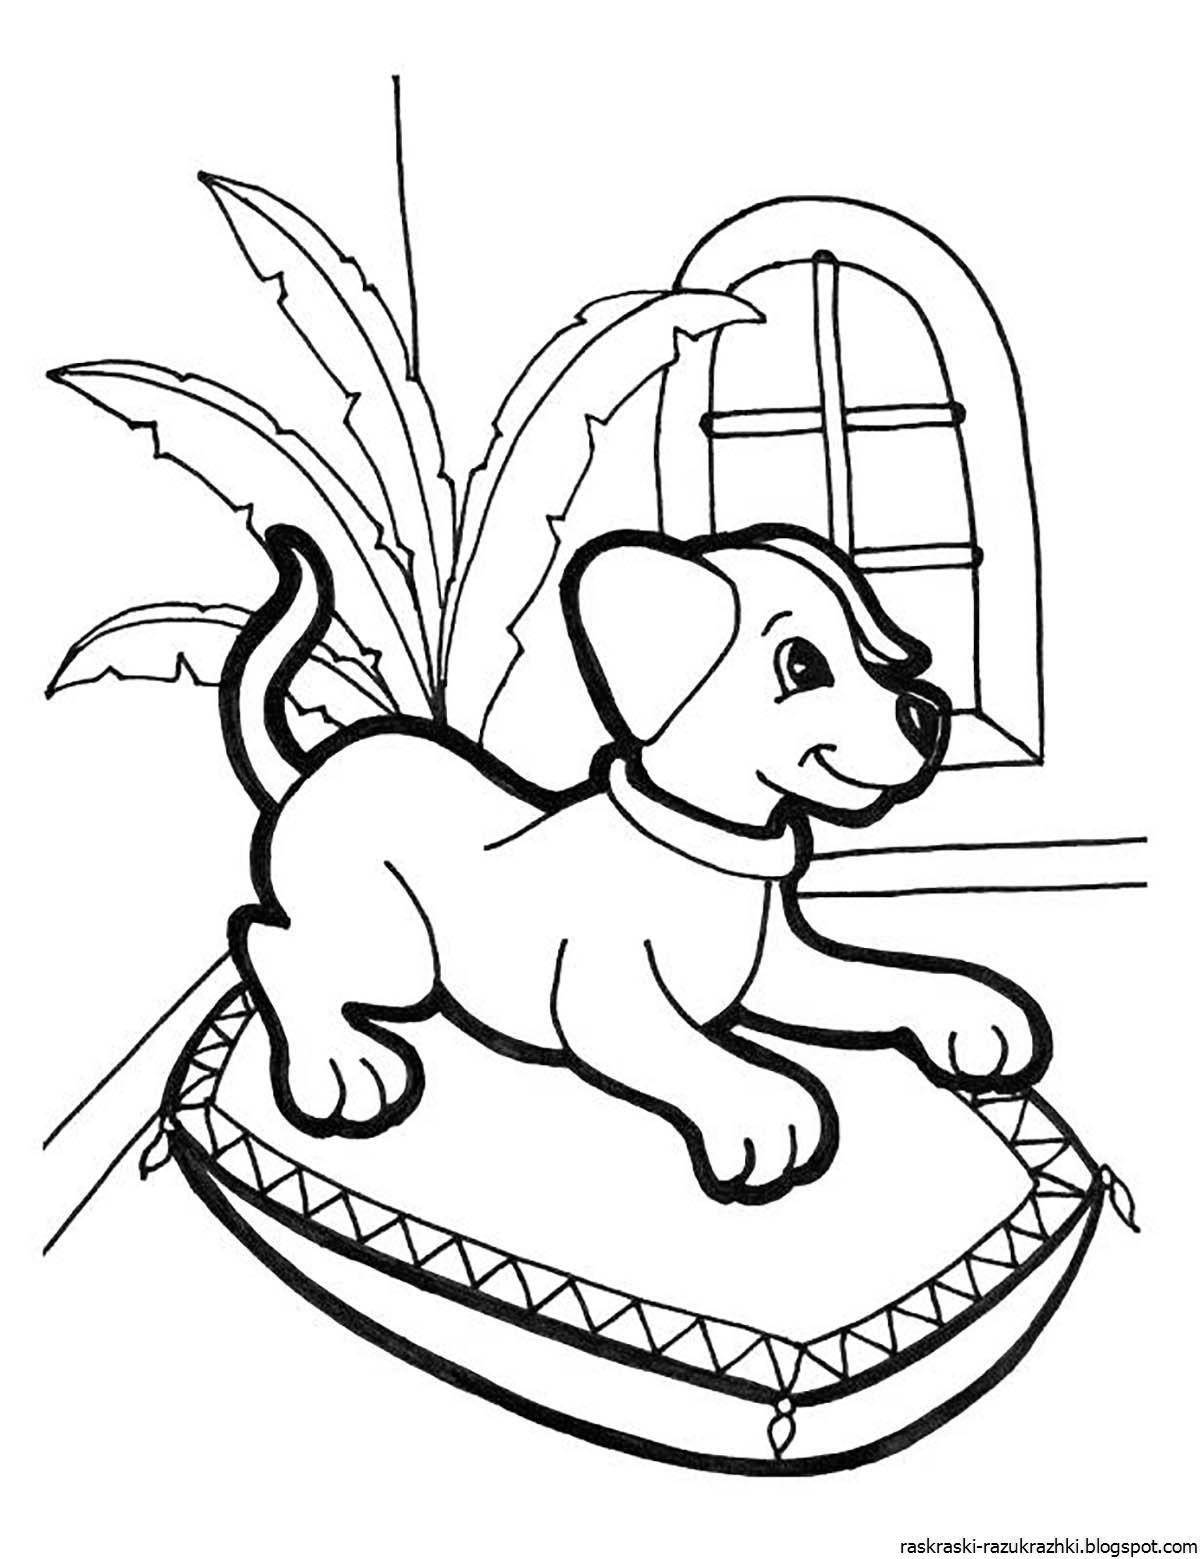 Playing coloring pages animals cats and dogs